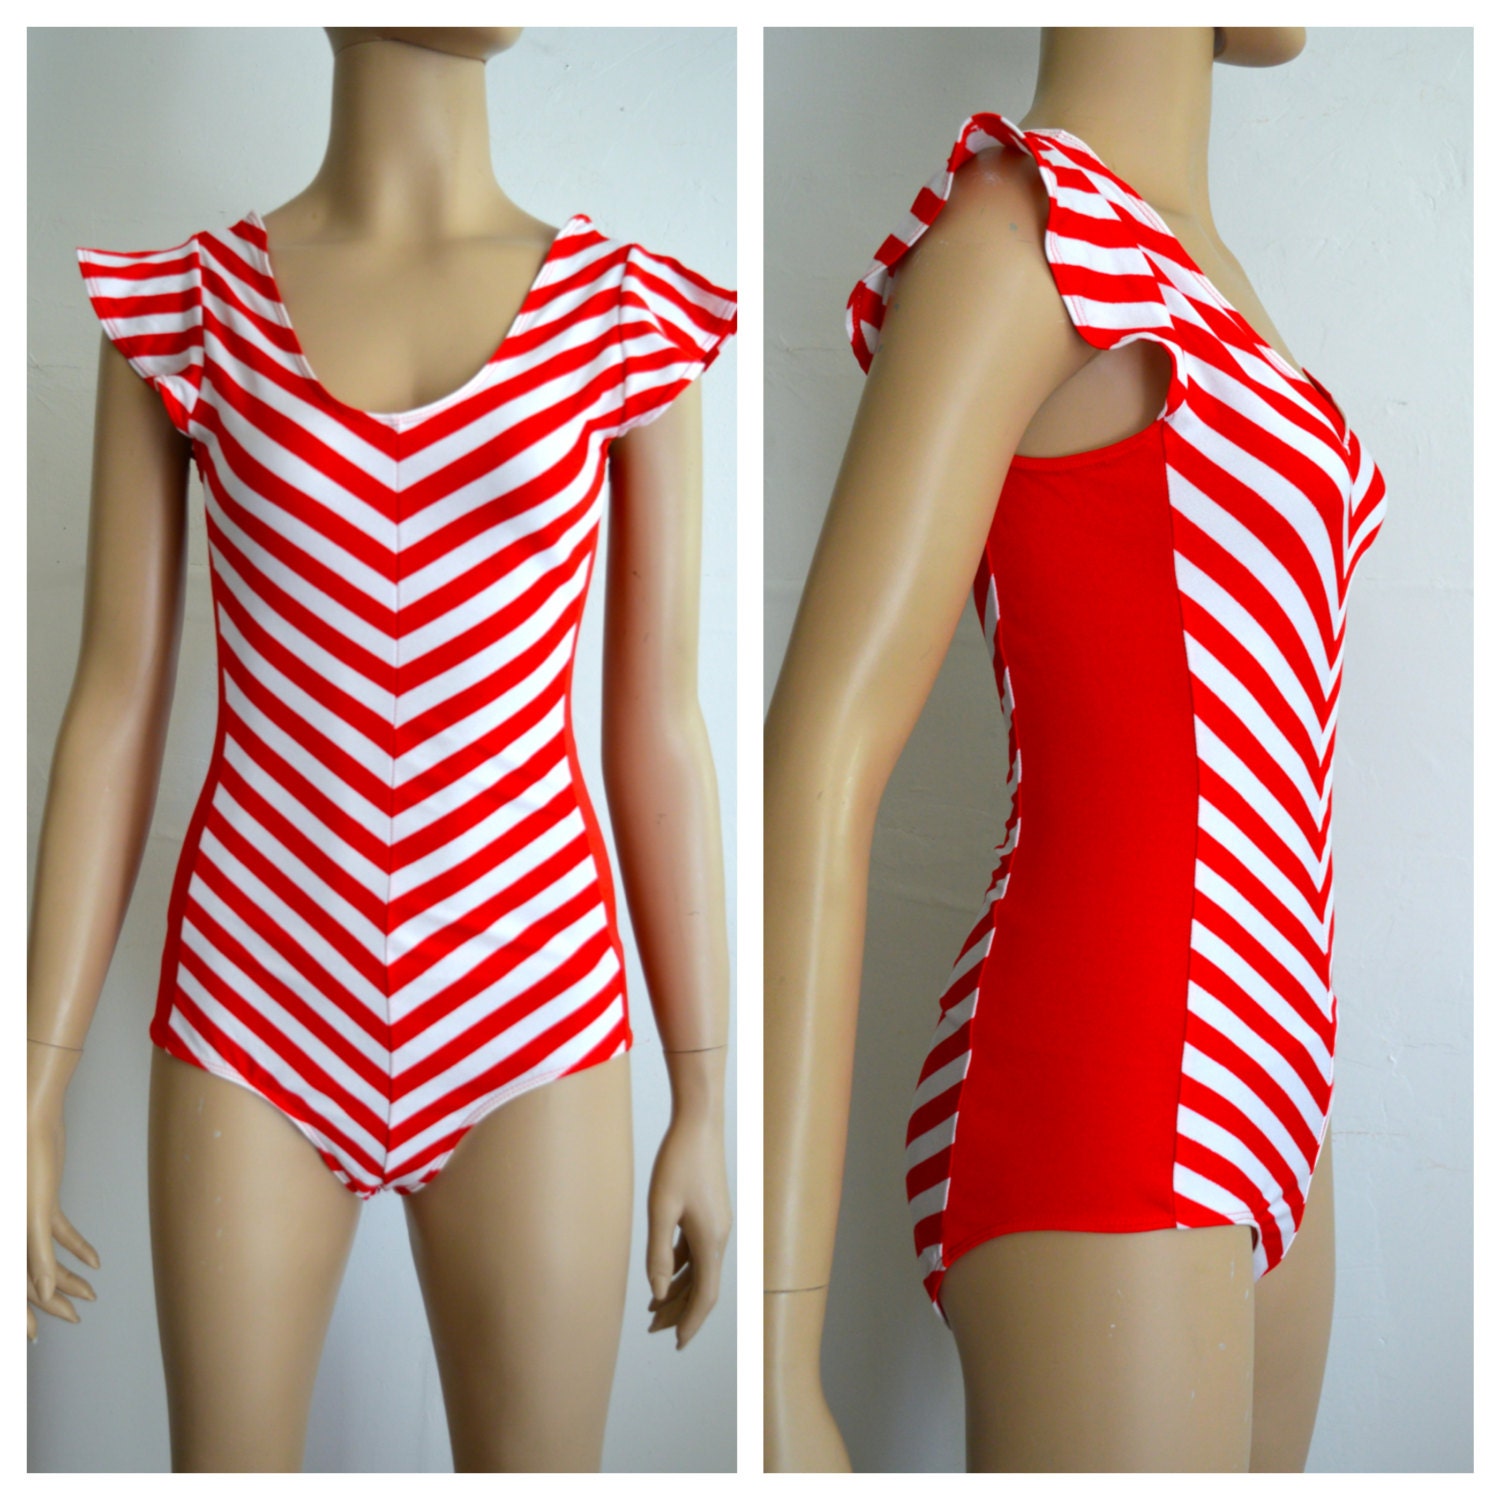 1980s red and white striped bathing suit s by CelebrationVintage